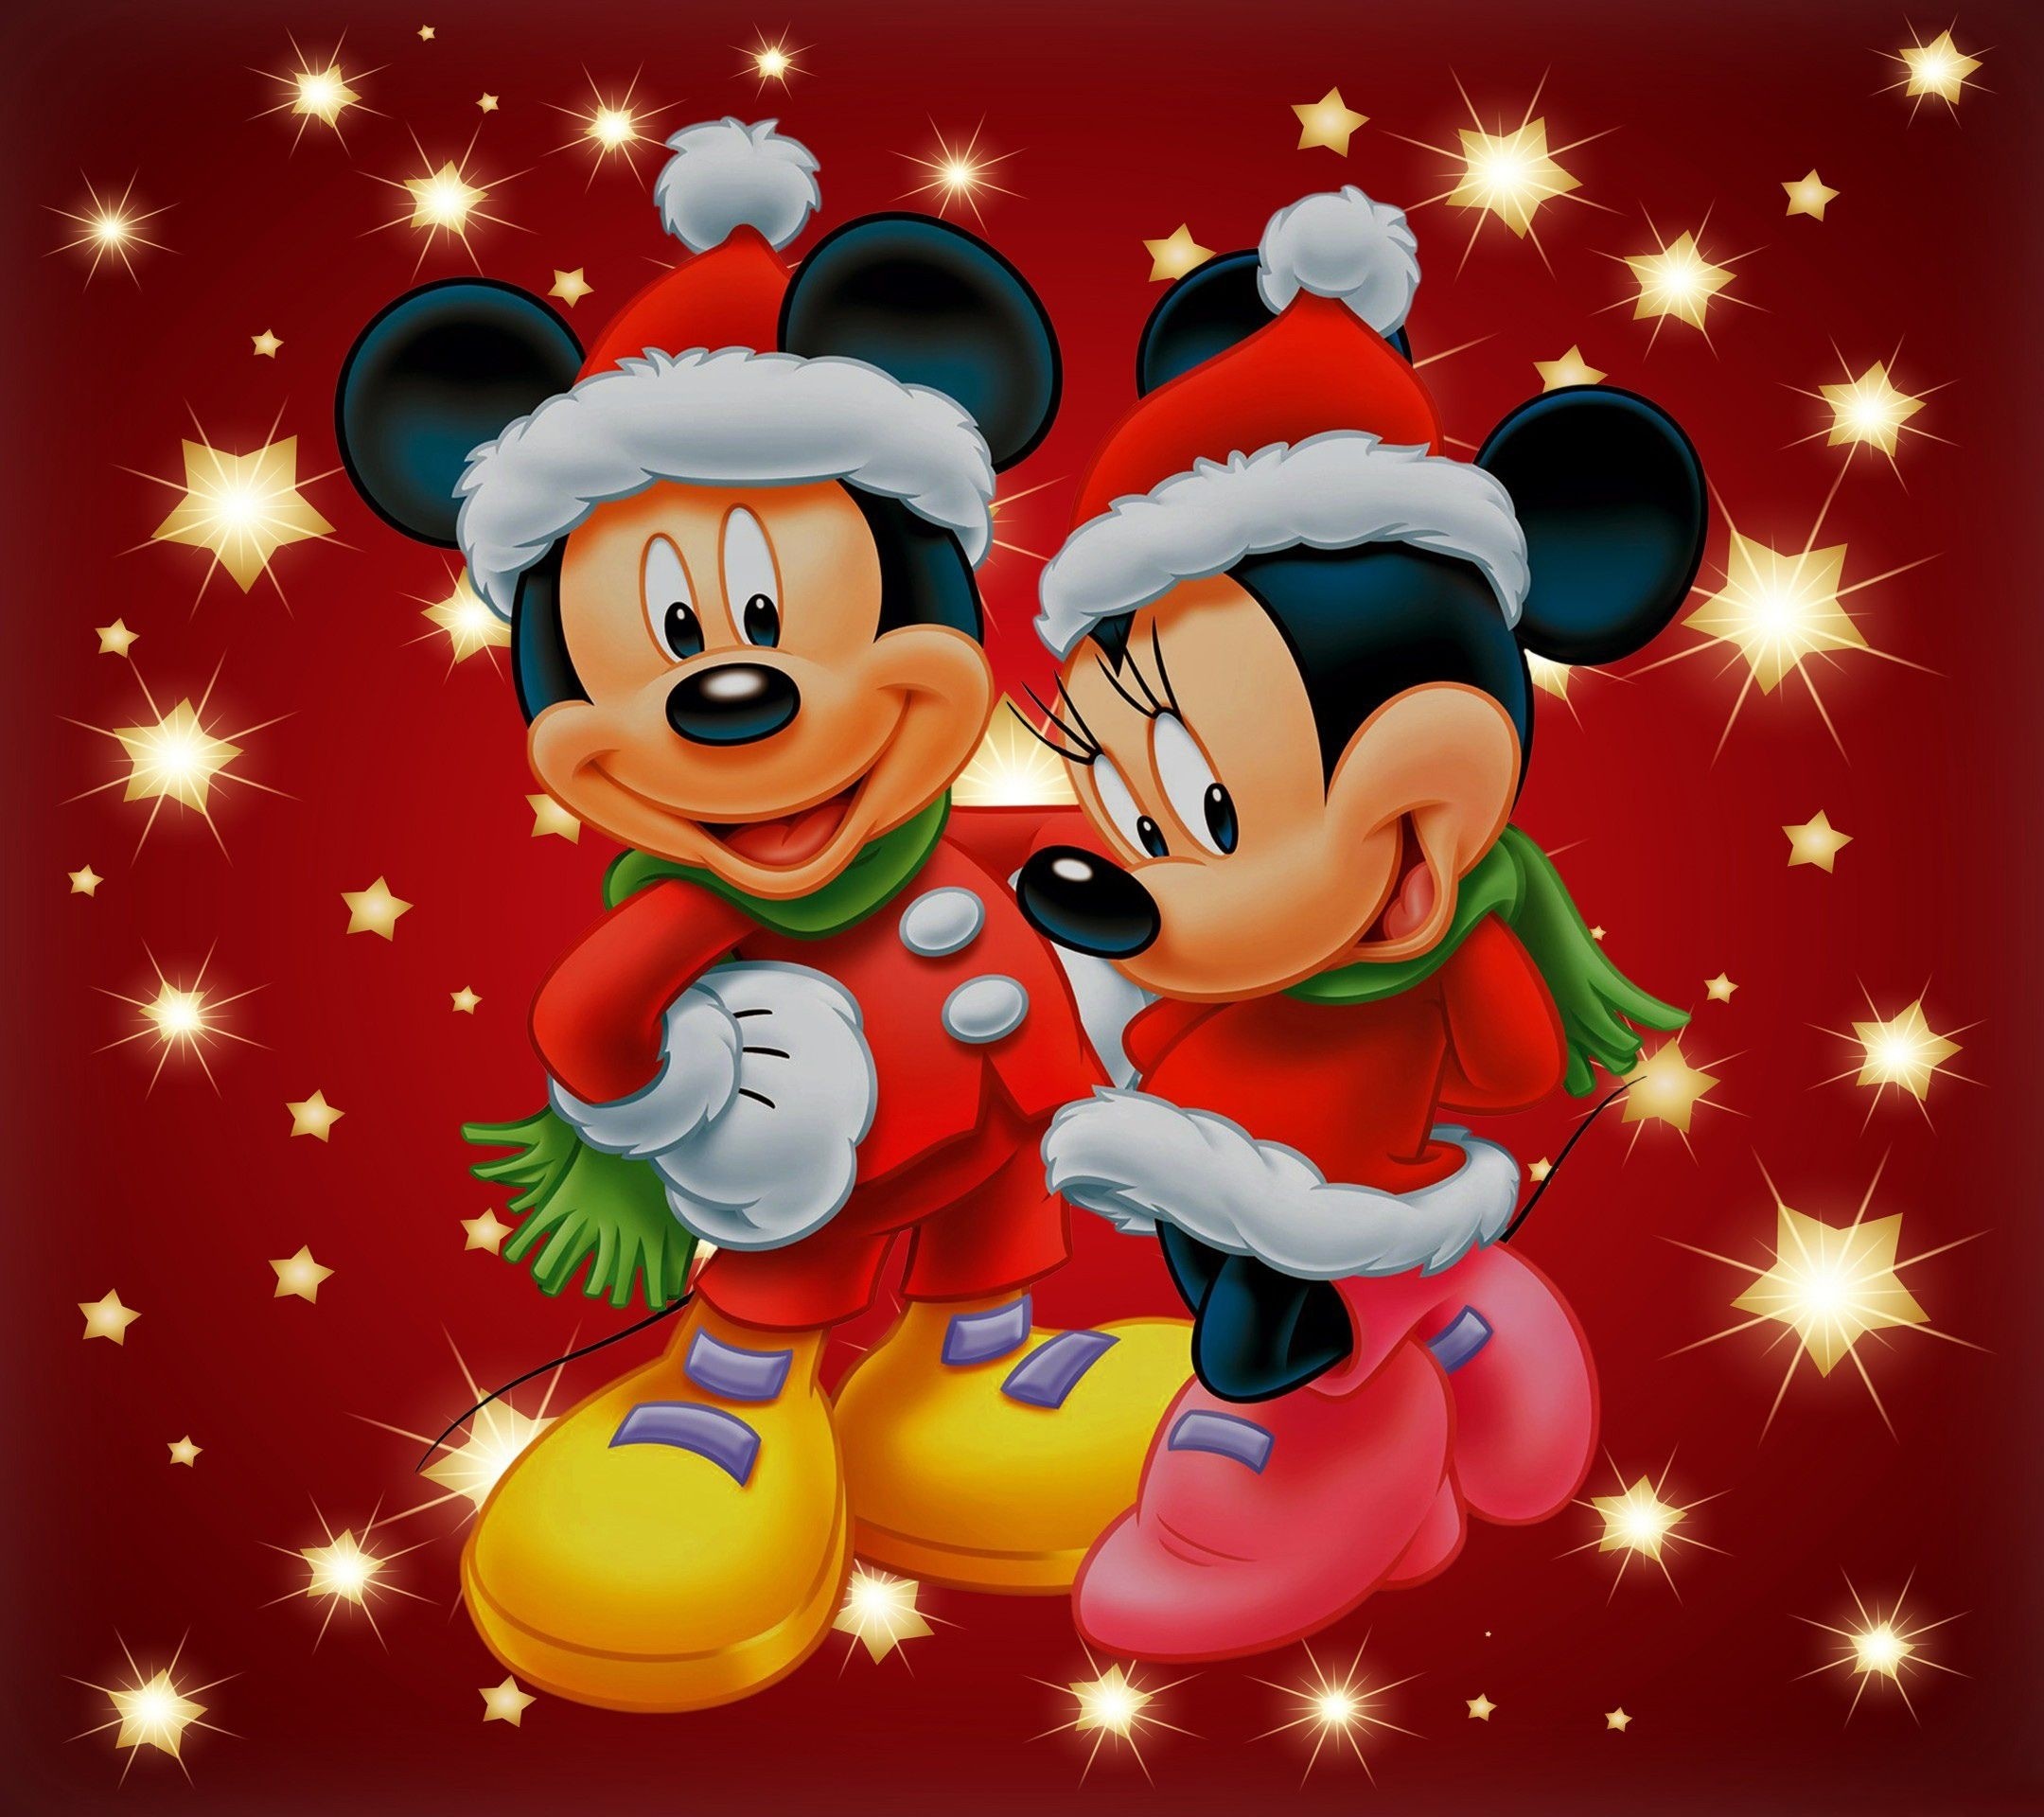 2160x1920 10 Most Popular Mickey Mouse Christmas Wallpapers FULL HD 1920Ã1080 For PC  Desktop